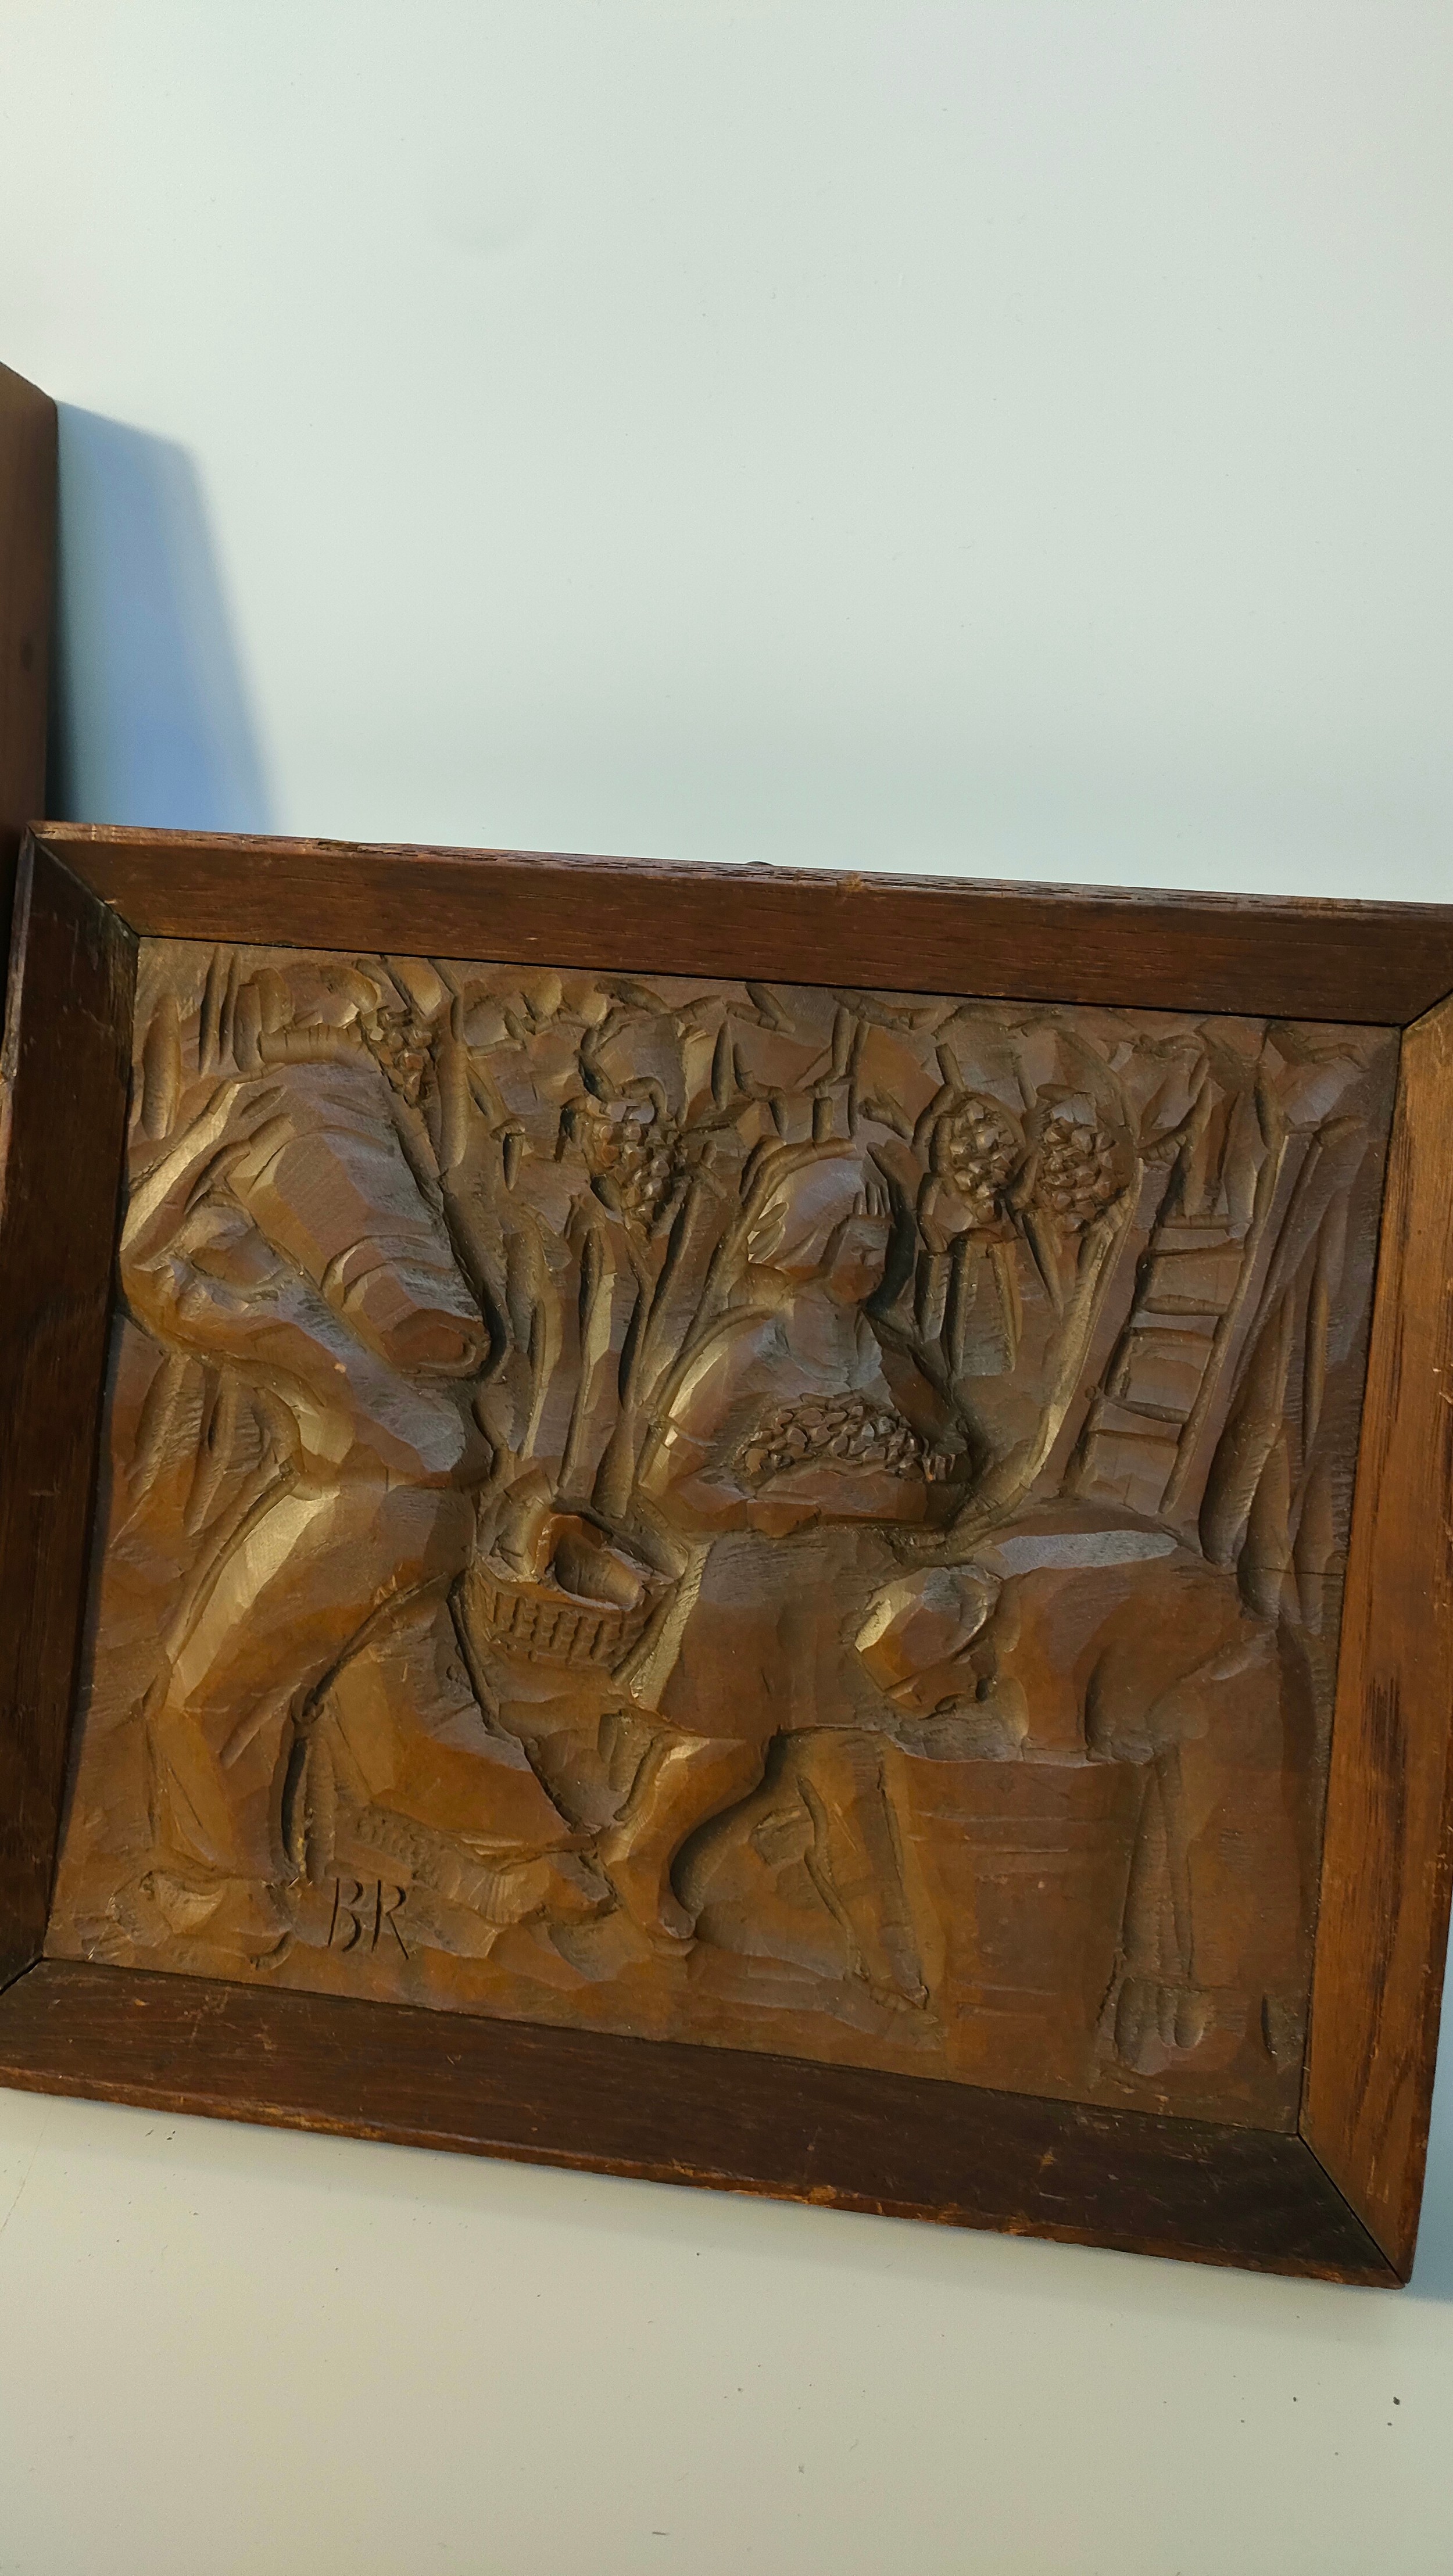 Three arts & crafts farming scenes raised relief hand carved plaques signed RB and BR - Image 4 of 4